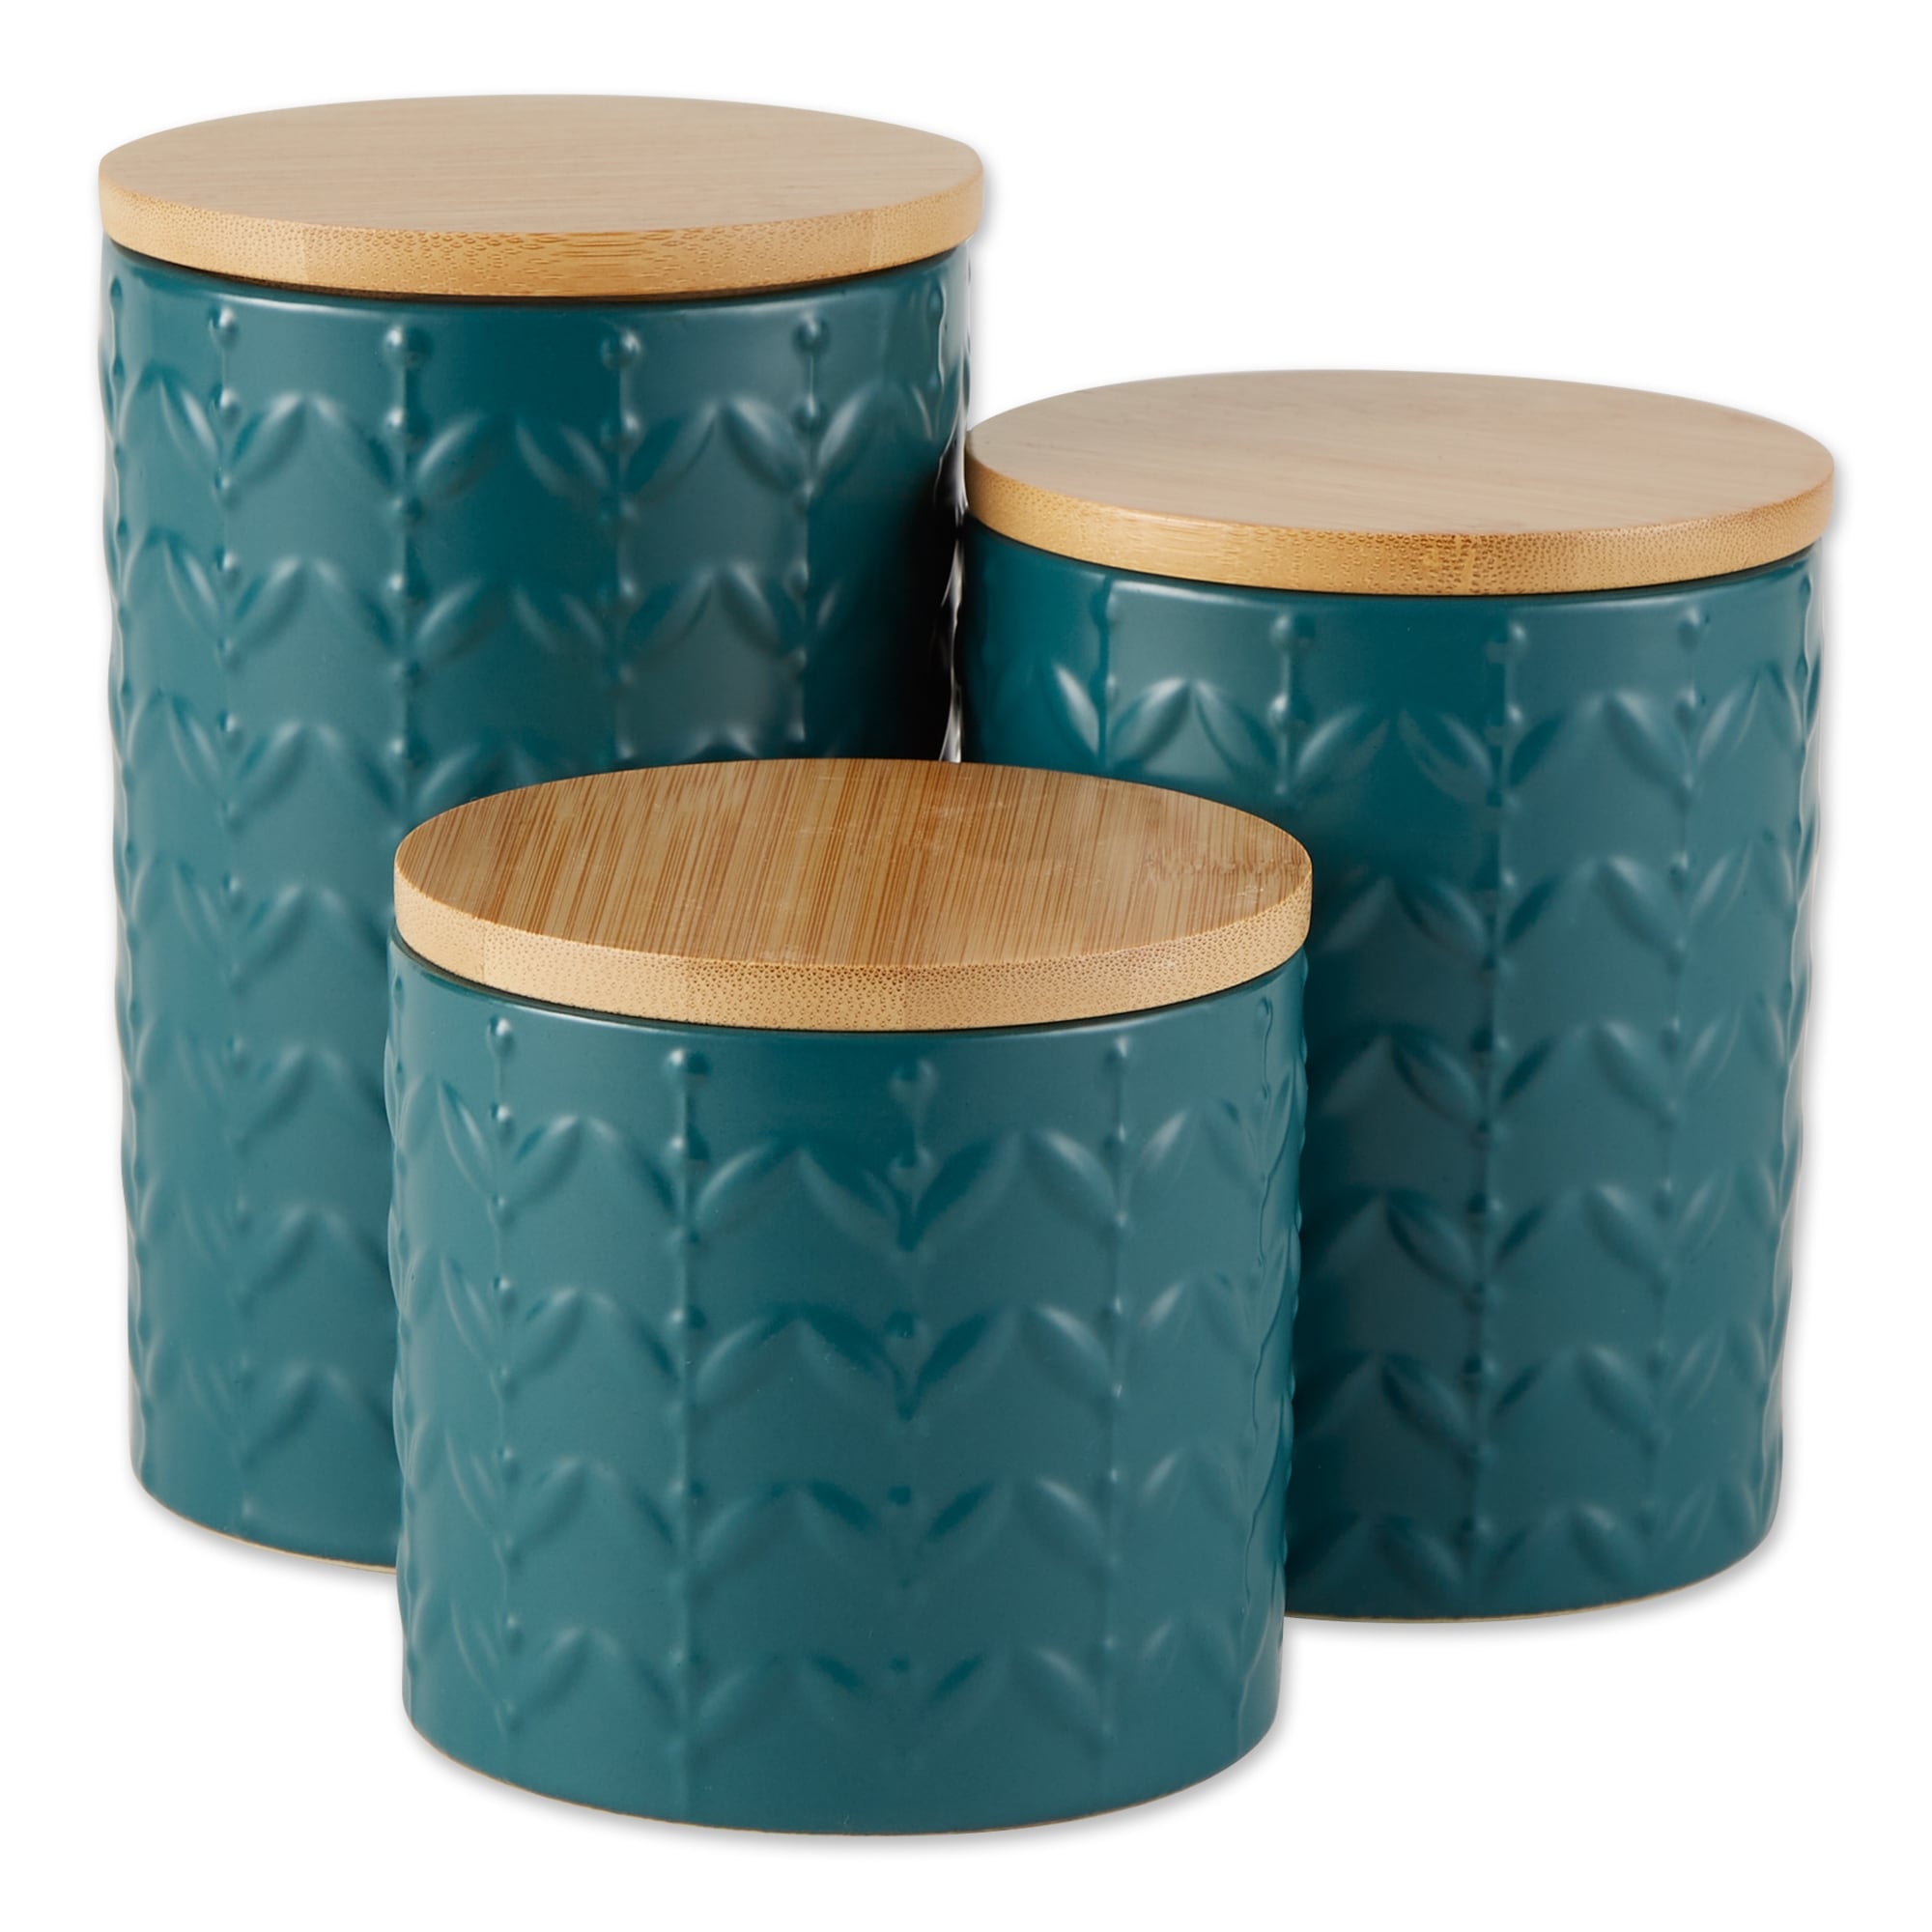 https://ak1.ostkcdn.com/images/products/is/images/direct/ff2785f6d7d237f146817b608d208be6da4d6b91/Retro-Vine-Texture-Ceramic-Canister-%28Set-of-3%29.jpg